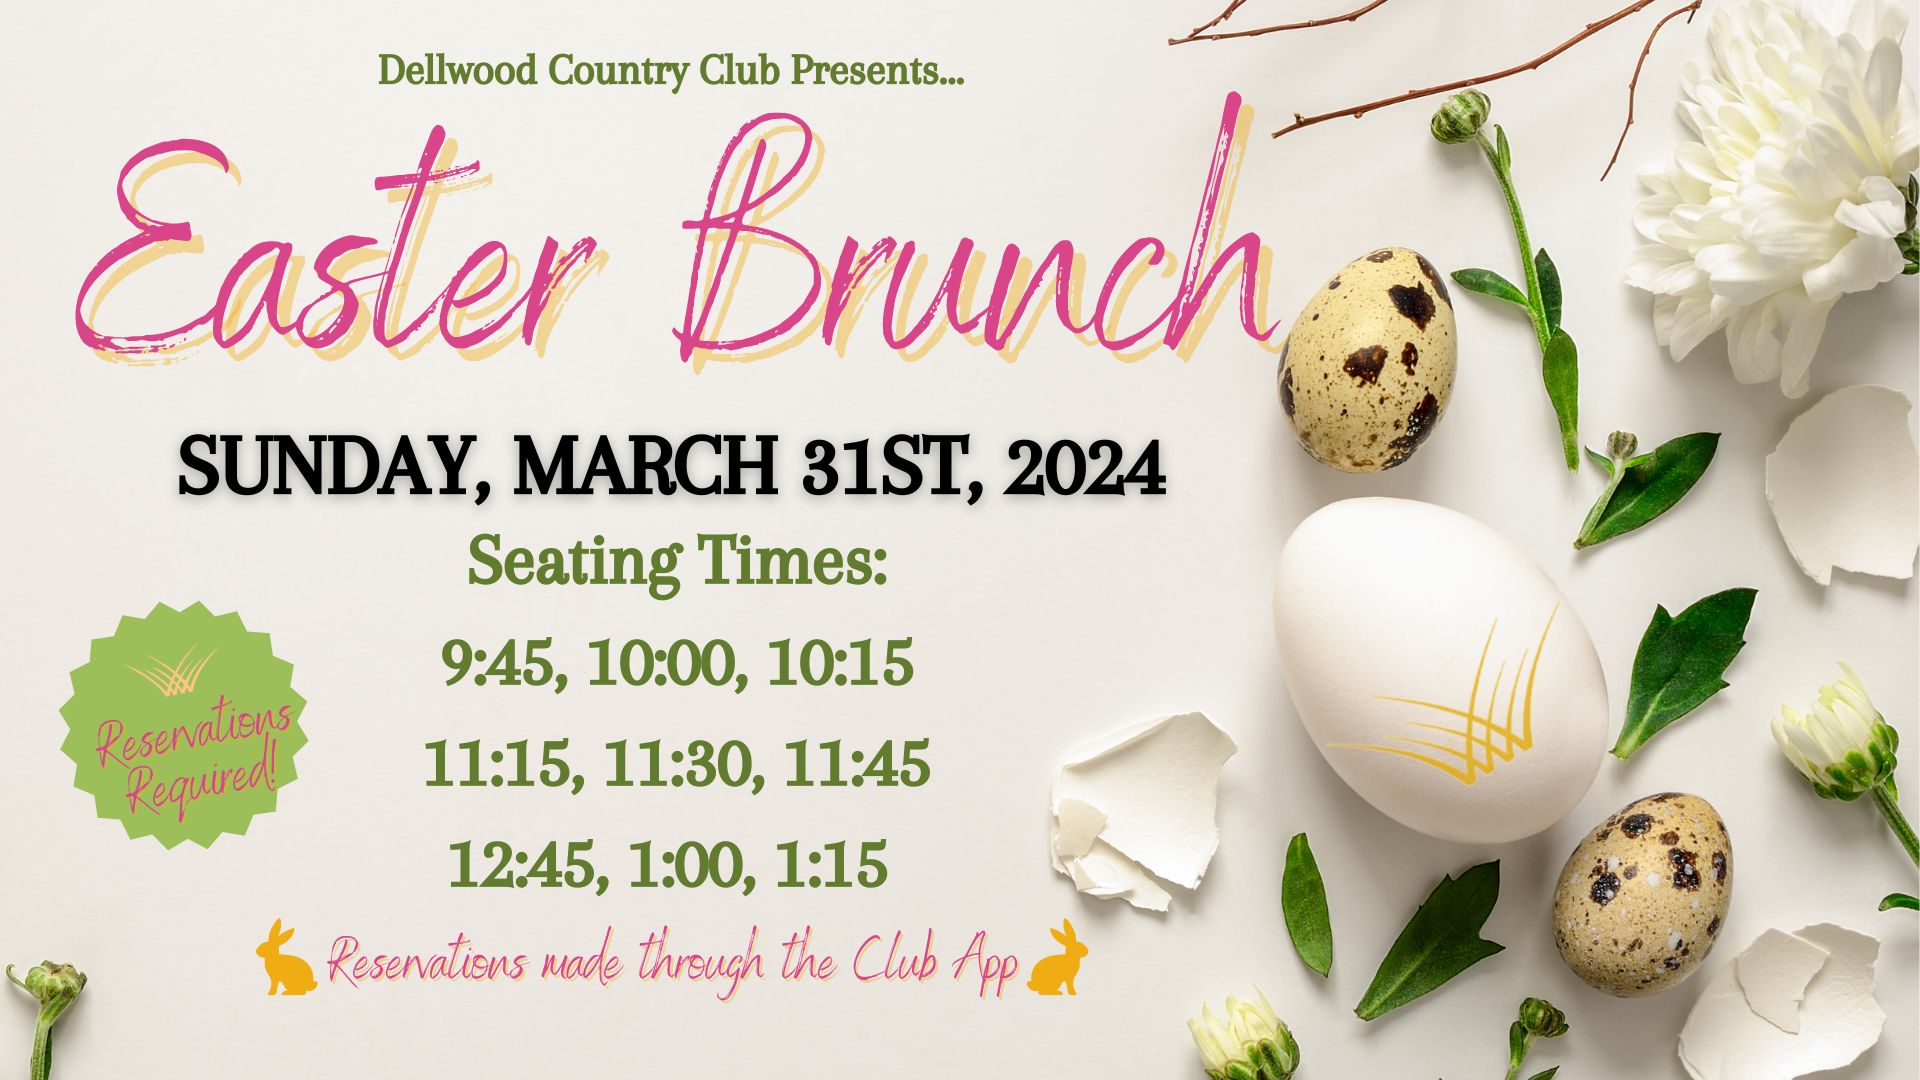 Easter Sunday Brunch 2024 – Dellwood Country Club